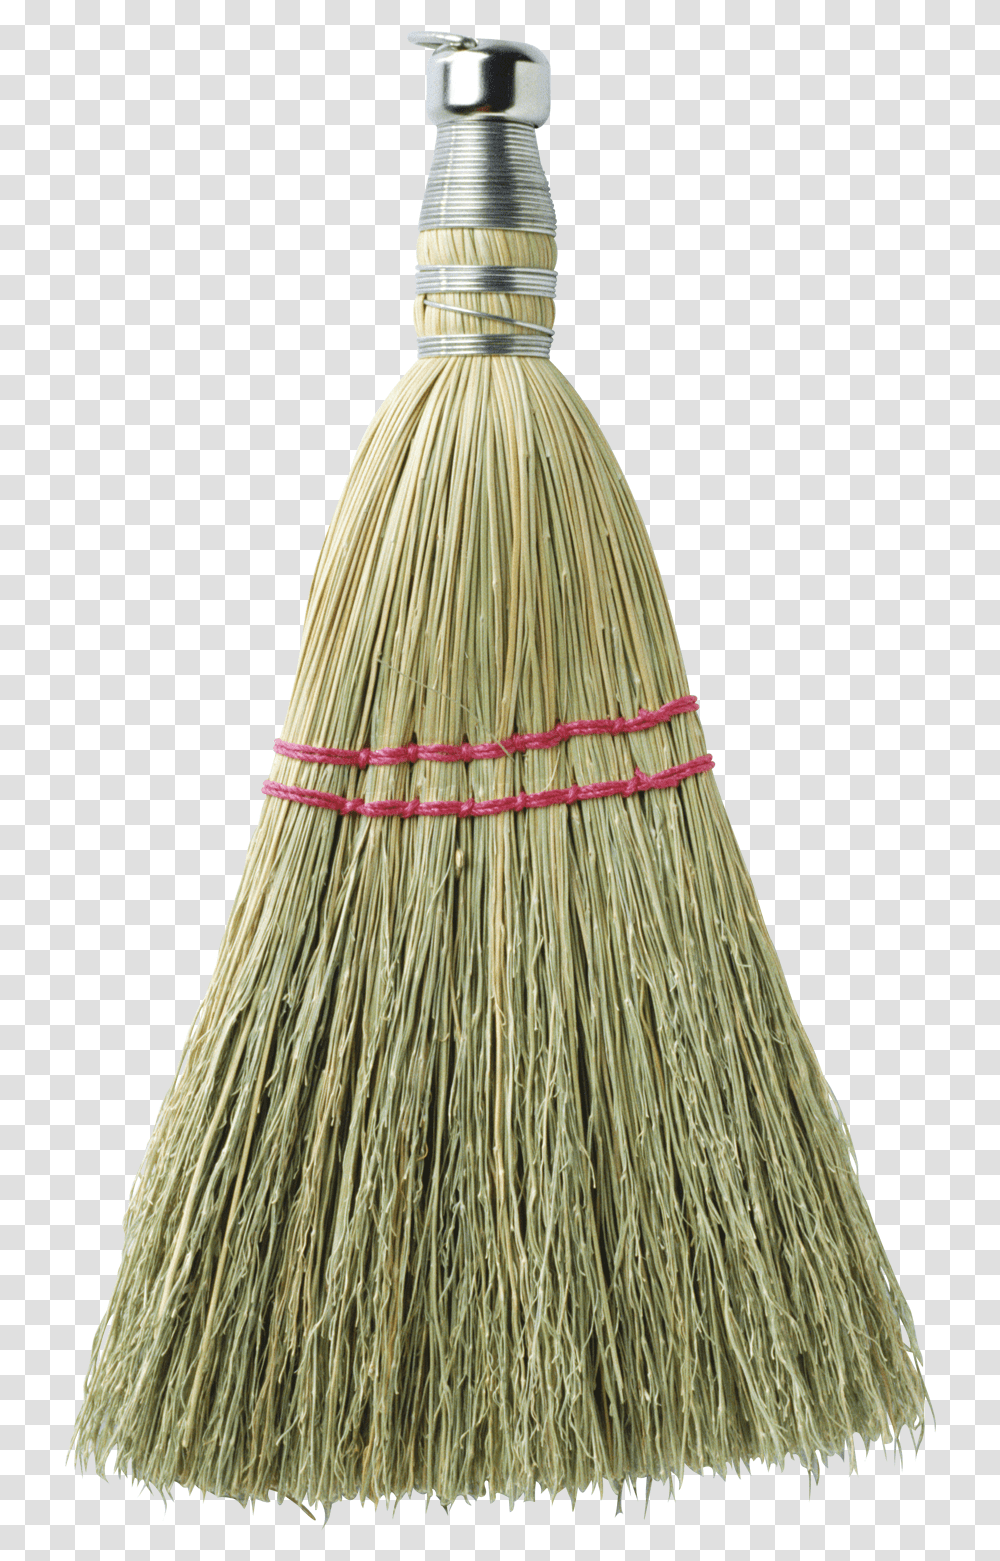 Broom Pictures Free Download Broom, Skirt, Clothing, Apparel Transparent Png